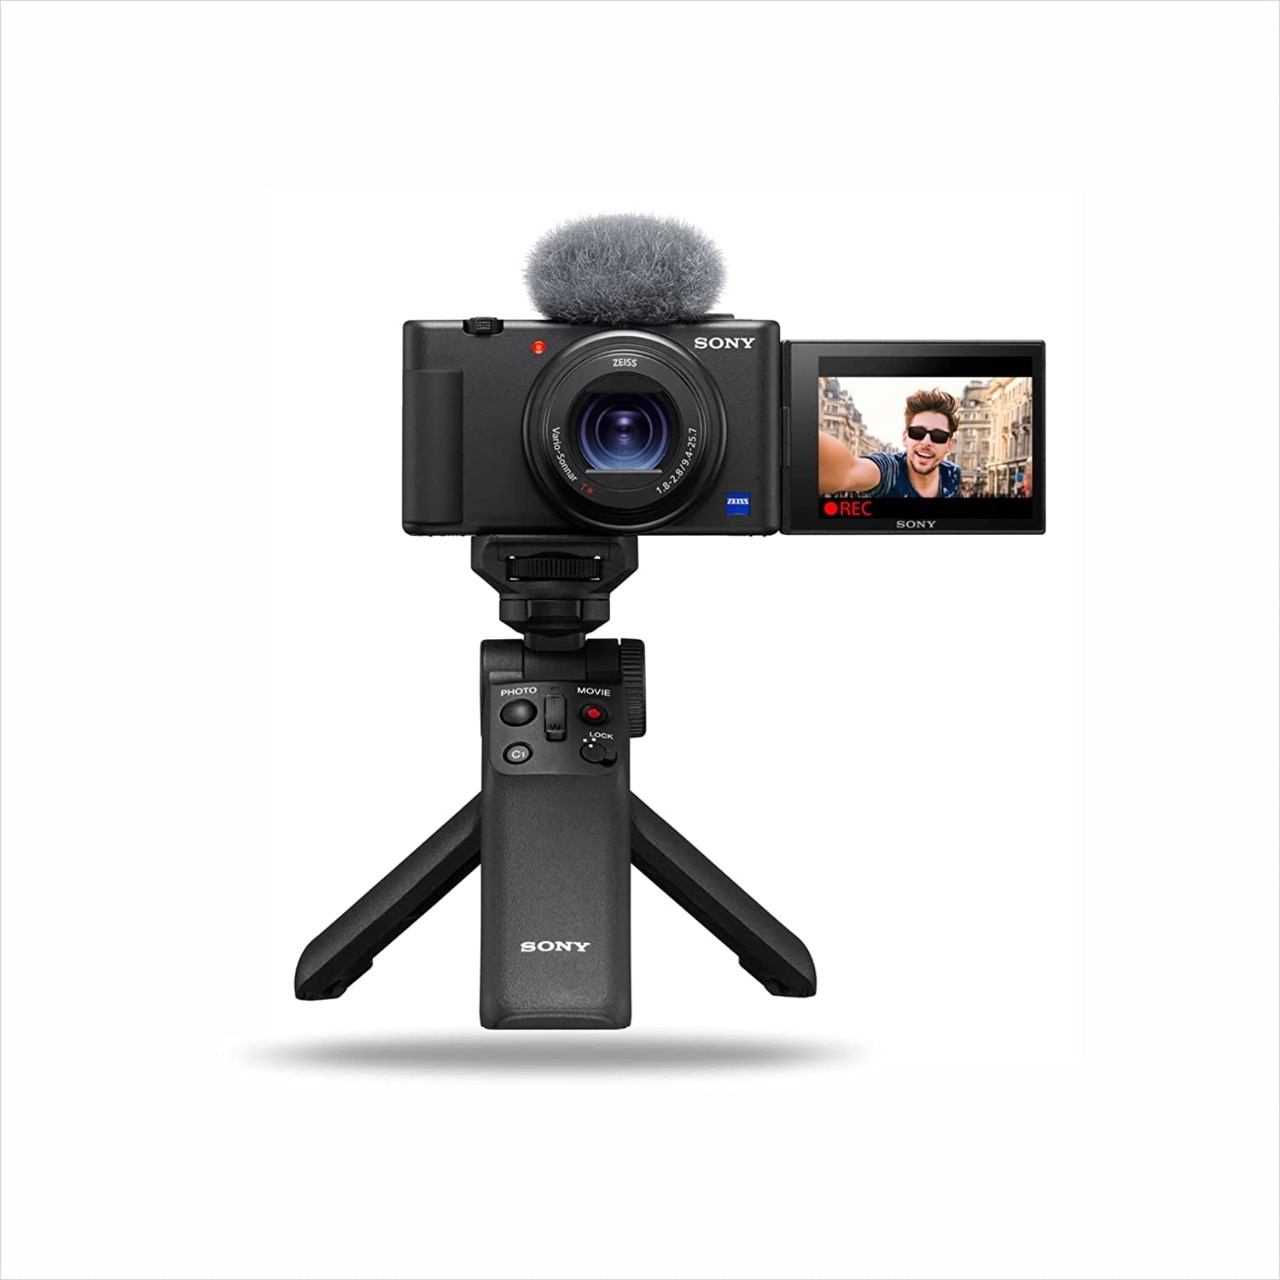 Amazon Festival Sale: This is the best camera for YouTube channel or video blogging, full 20 thousand discount is available in Amazon Diwali Sale